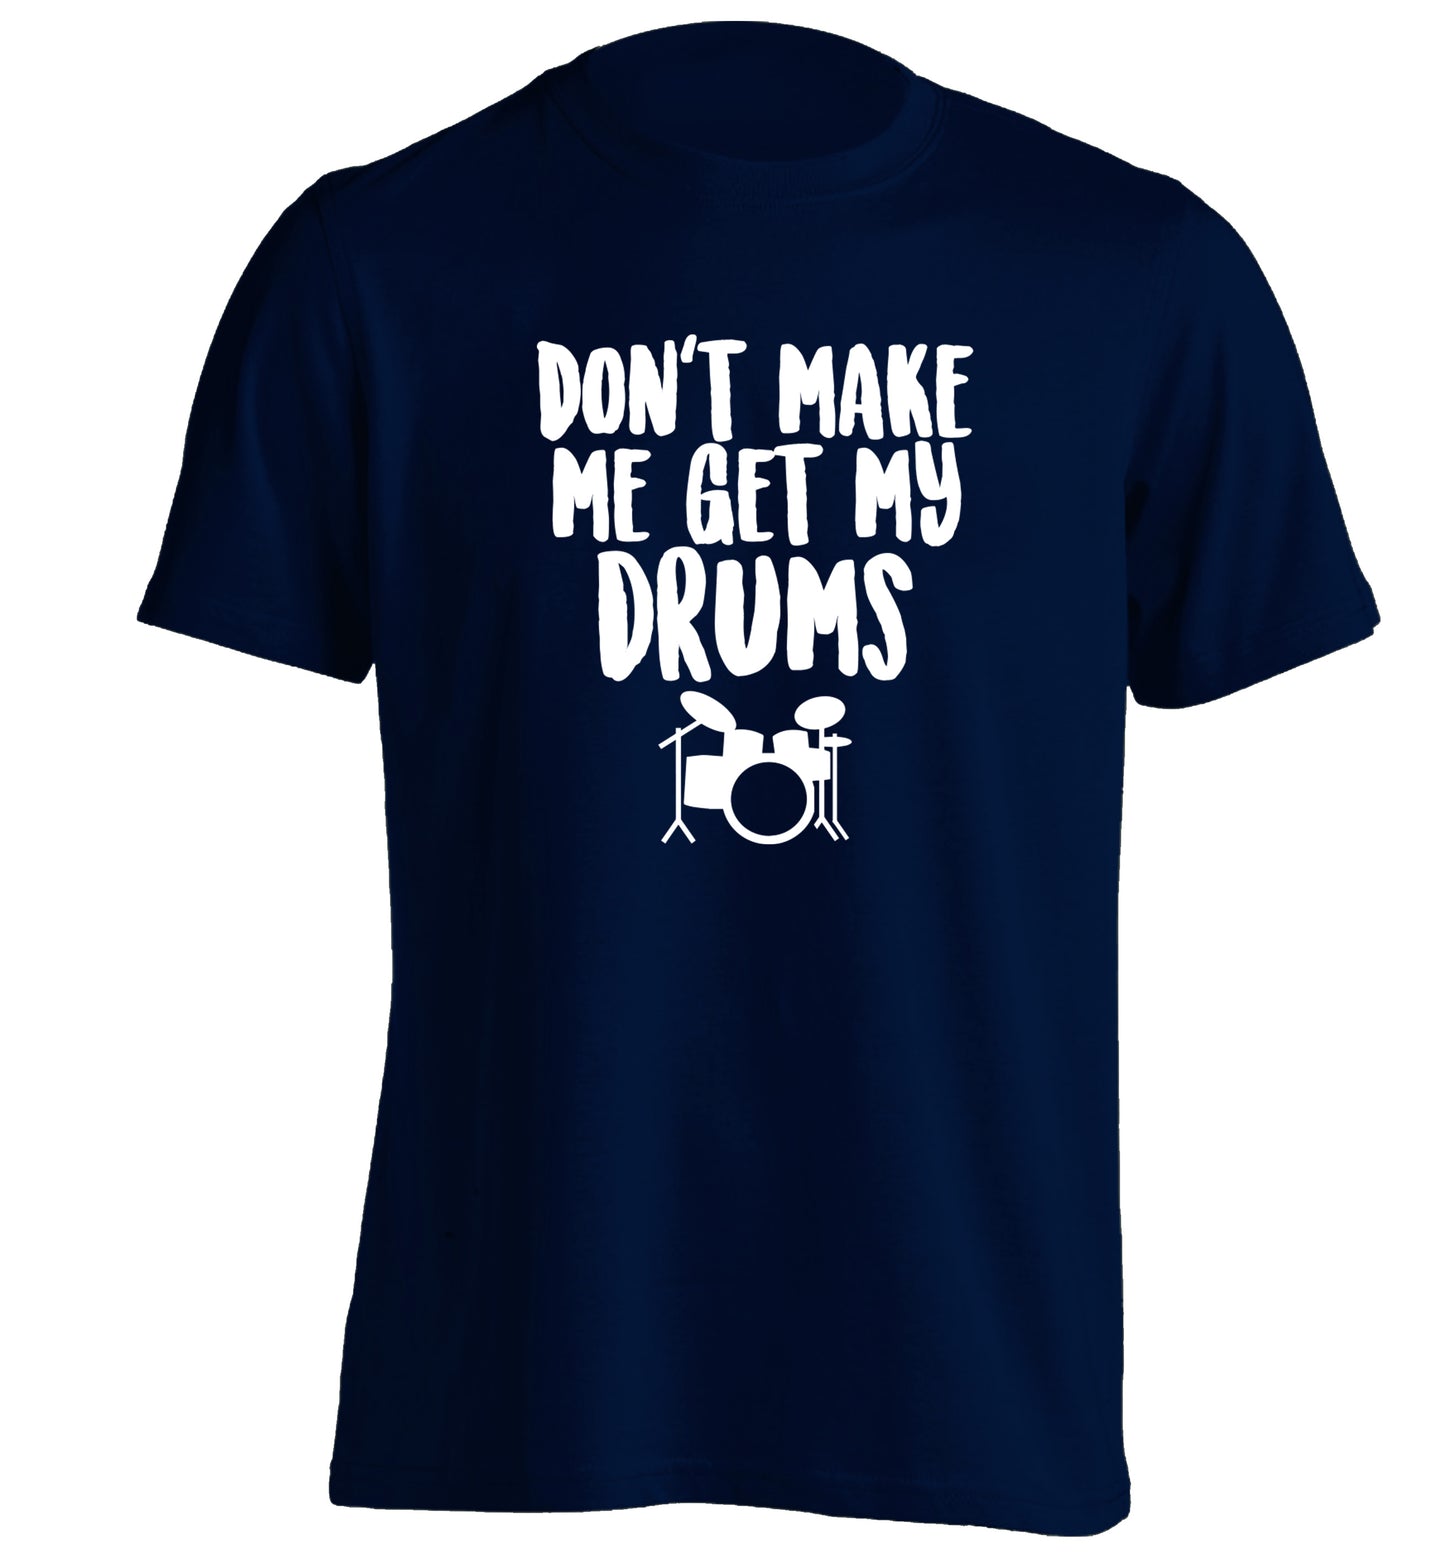 Don't make me get my drums adults unisex navy Tshirt 2XL